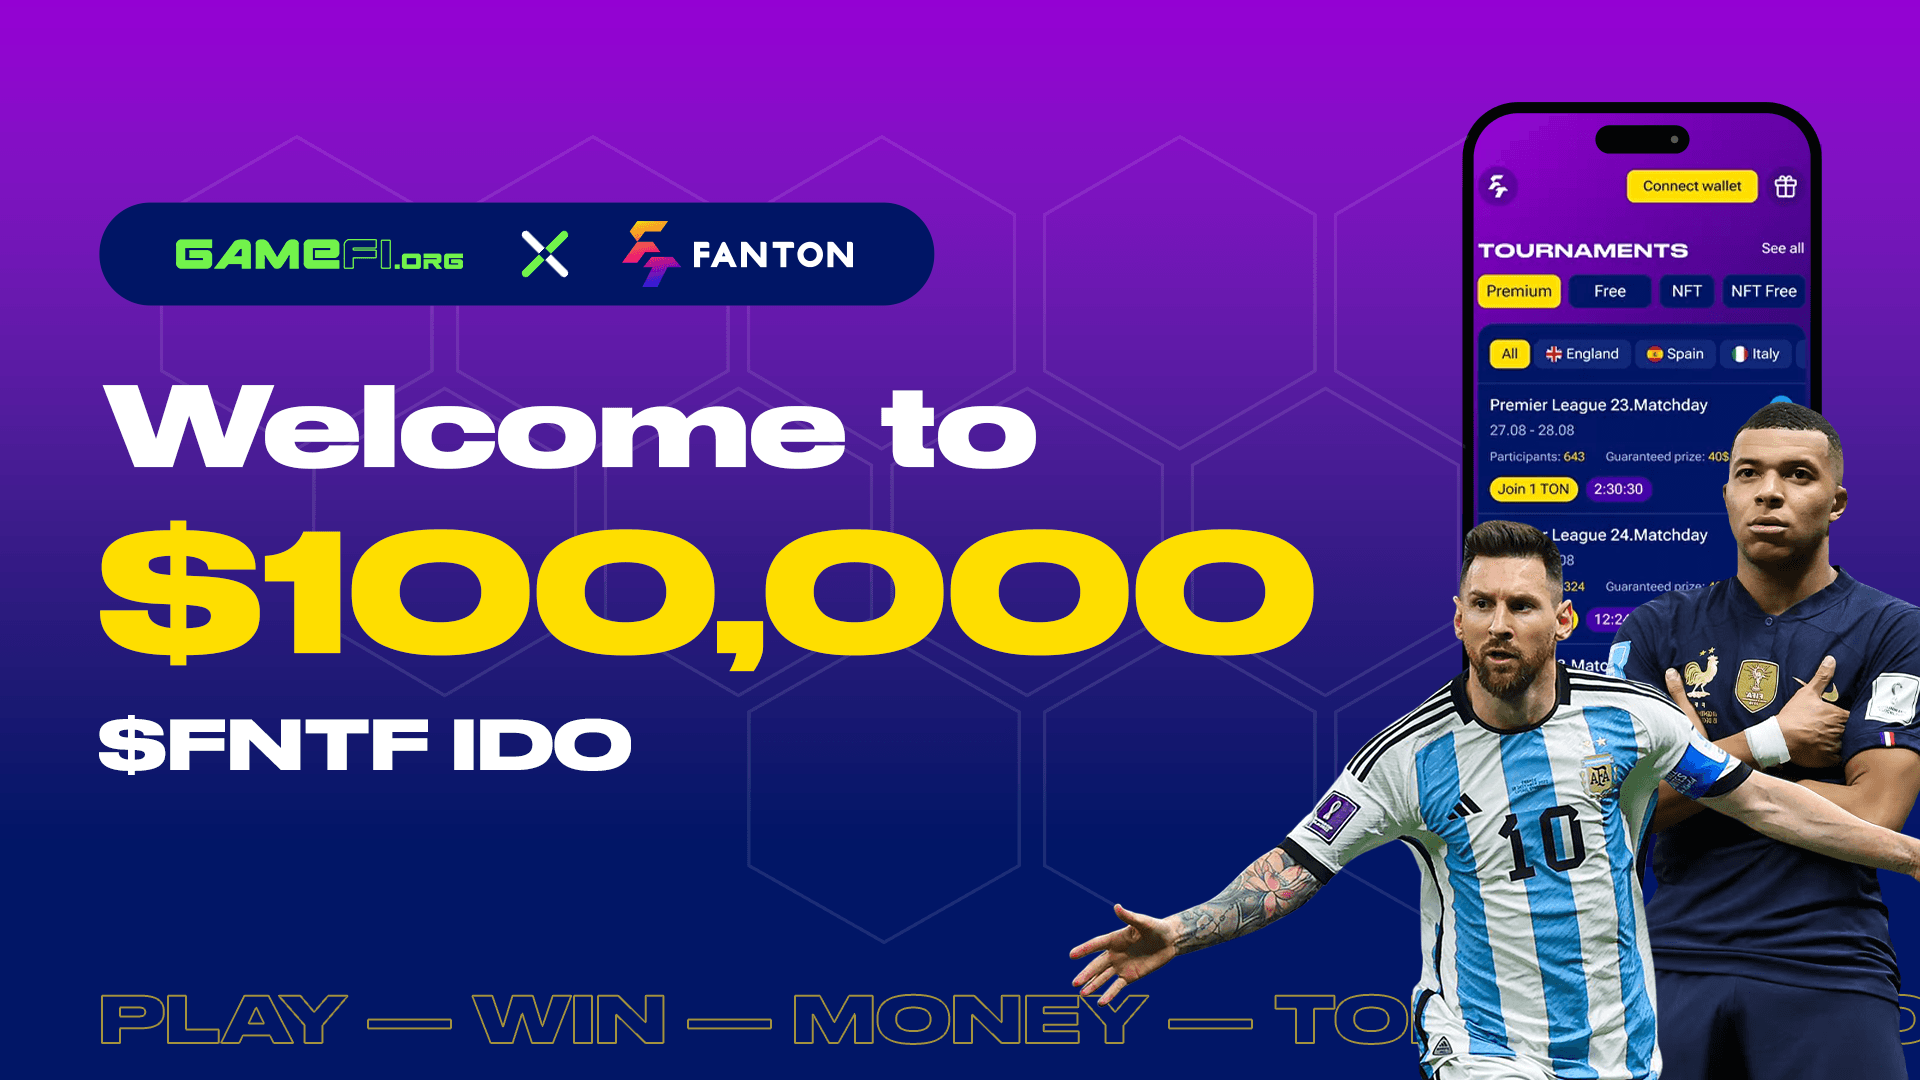 Are you informed that Fanton's $100,000 IDO is launching on GameFi.org?